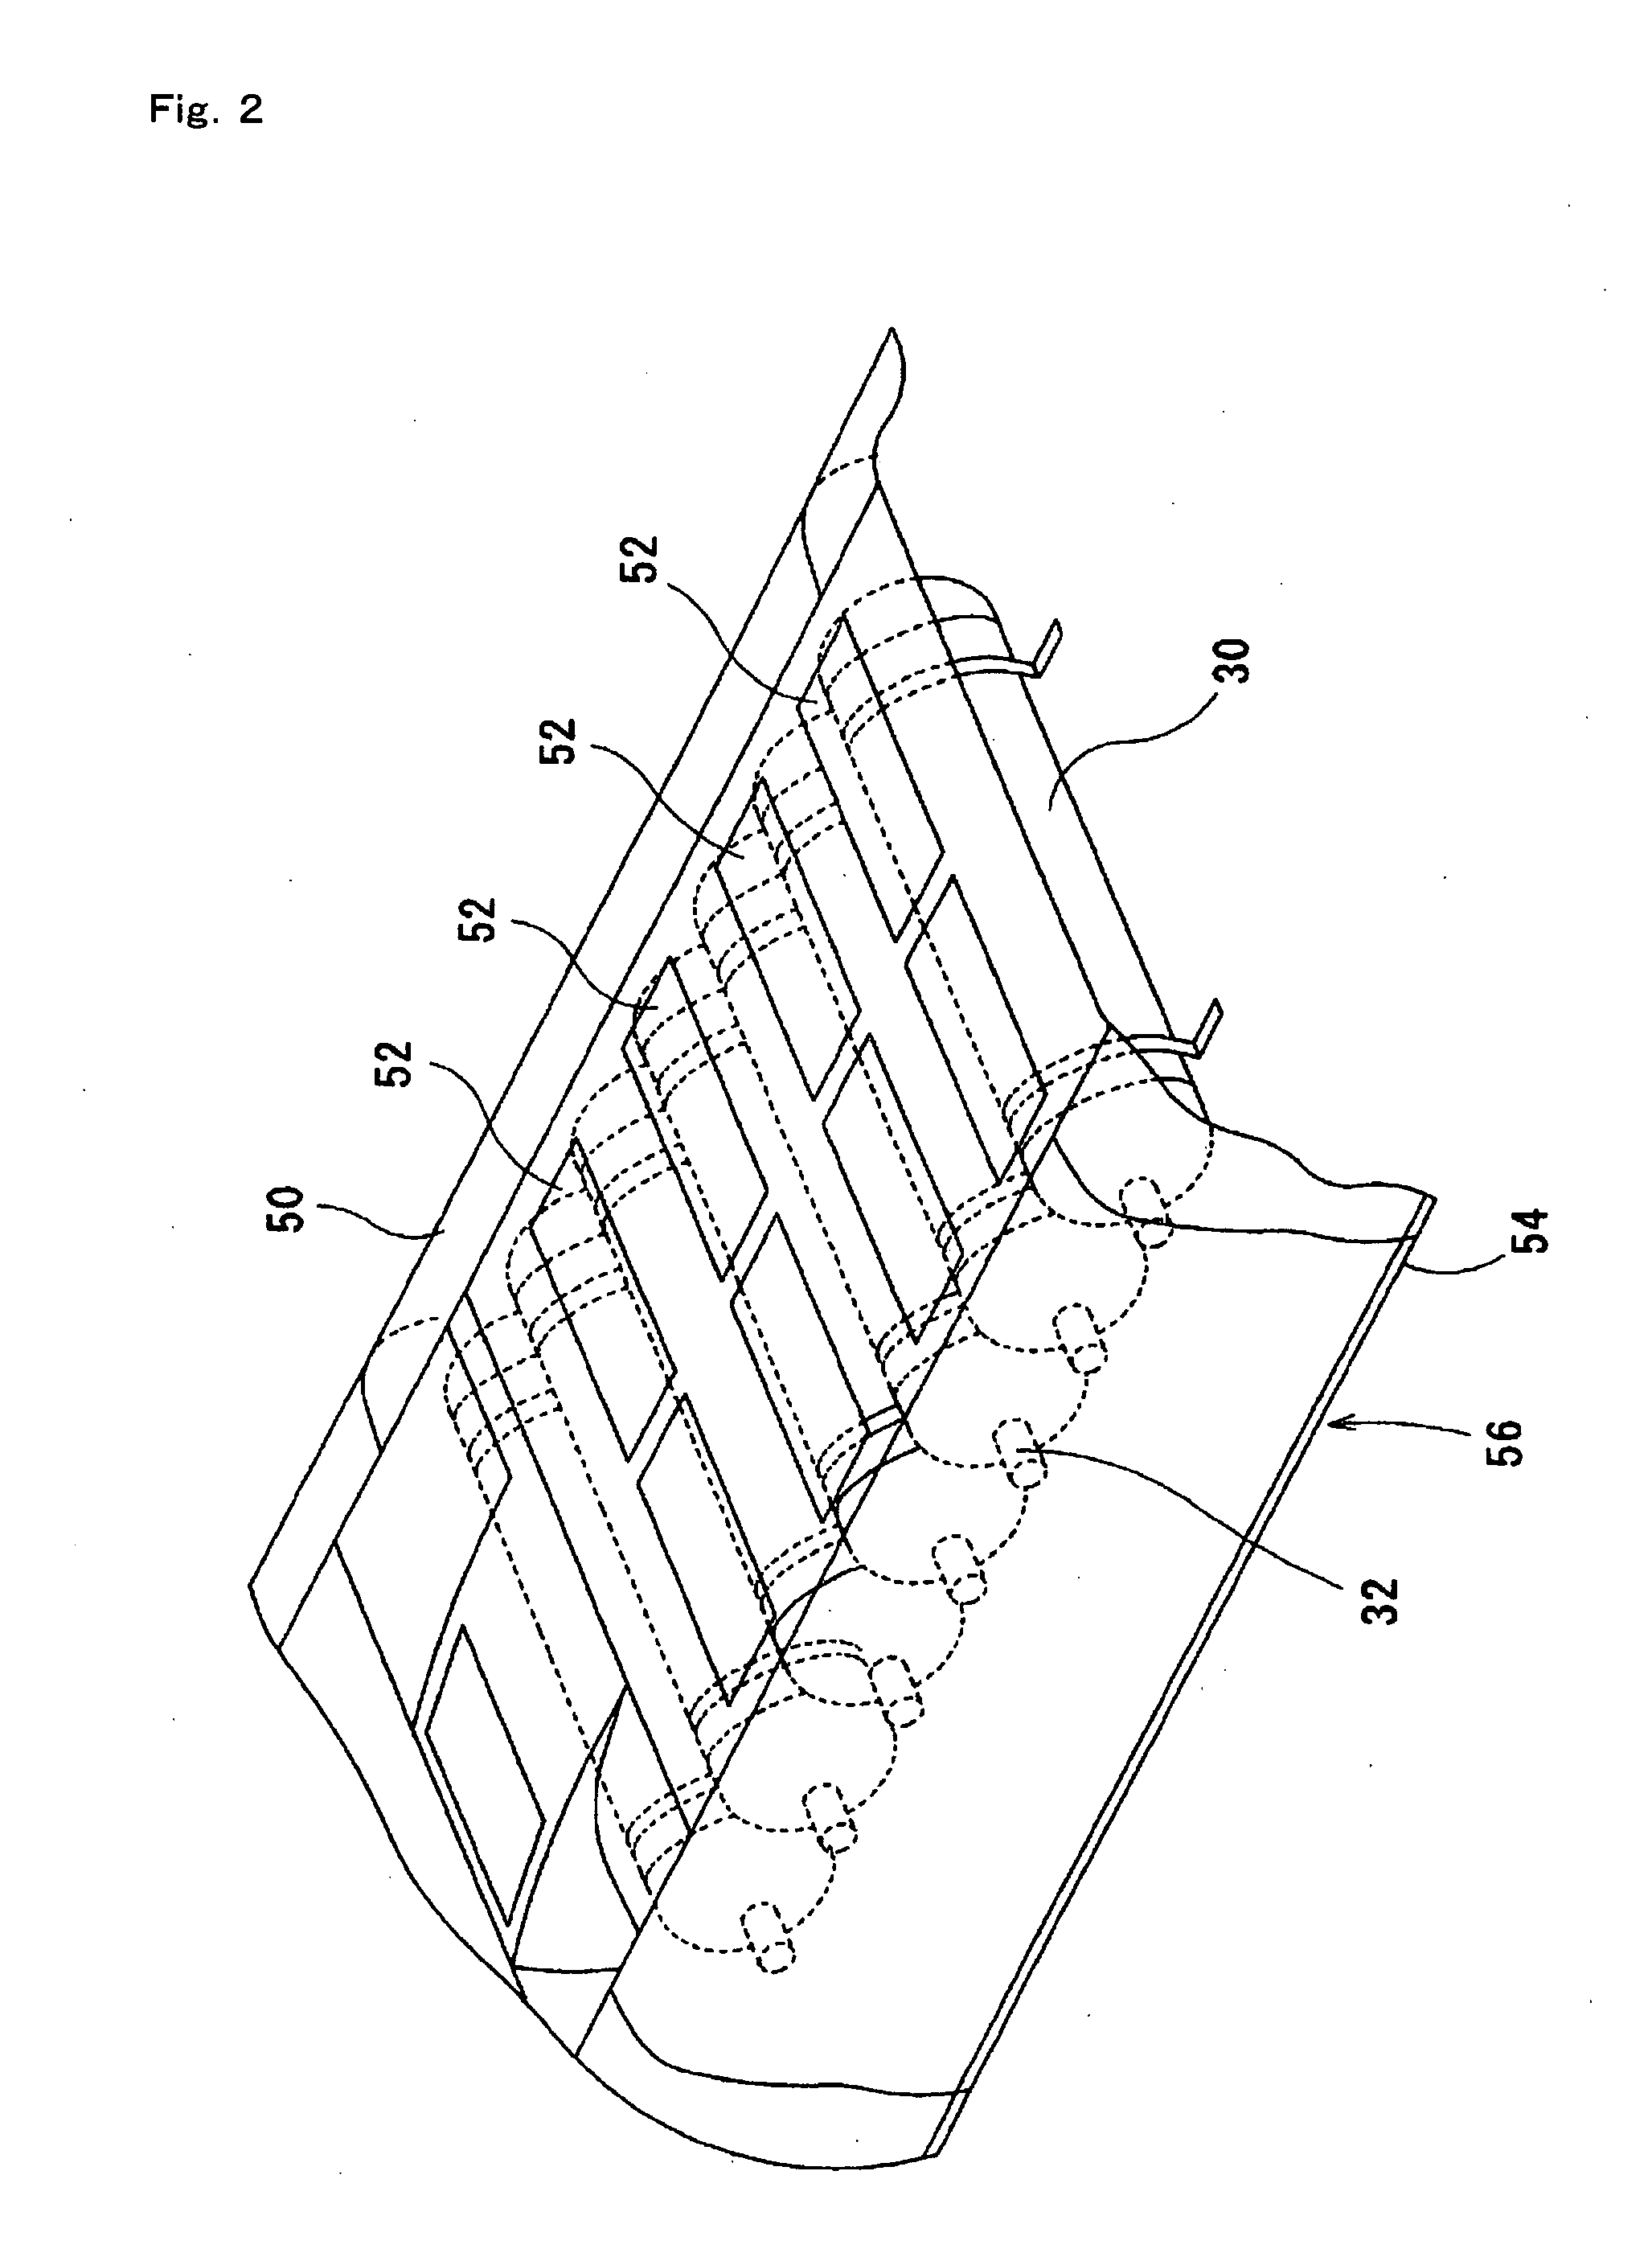 Vehicle And Method Of Mounting Gas Fuel Tank